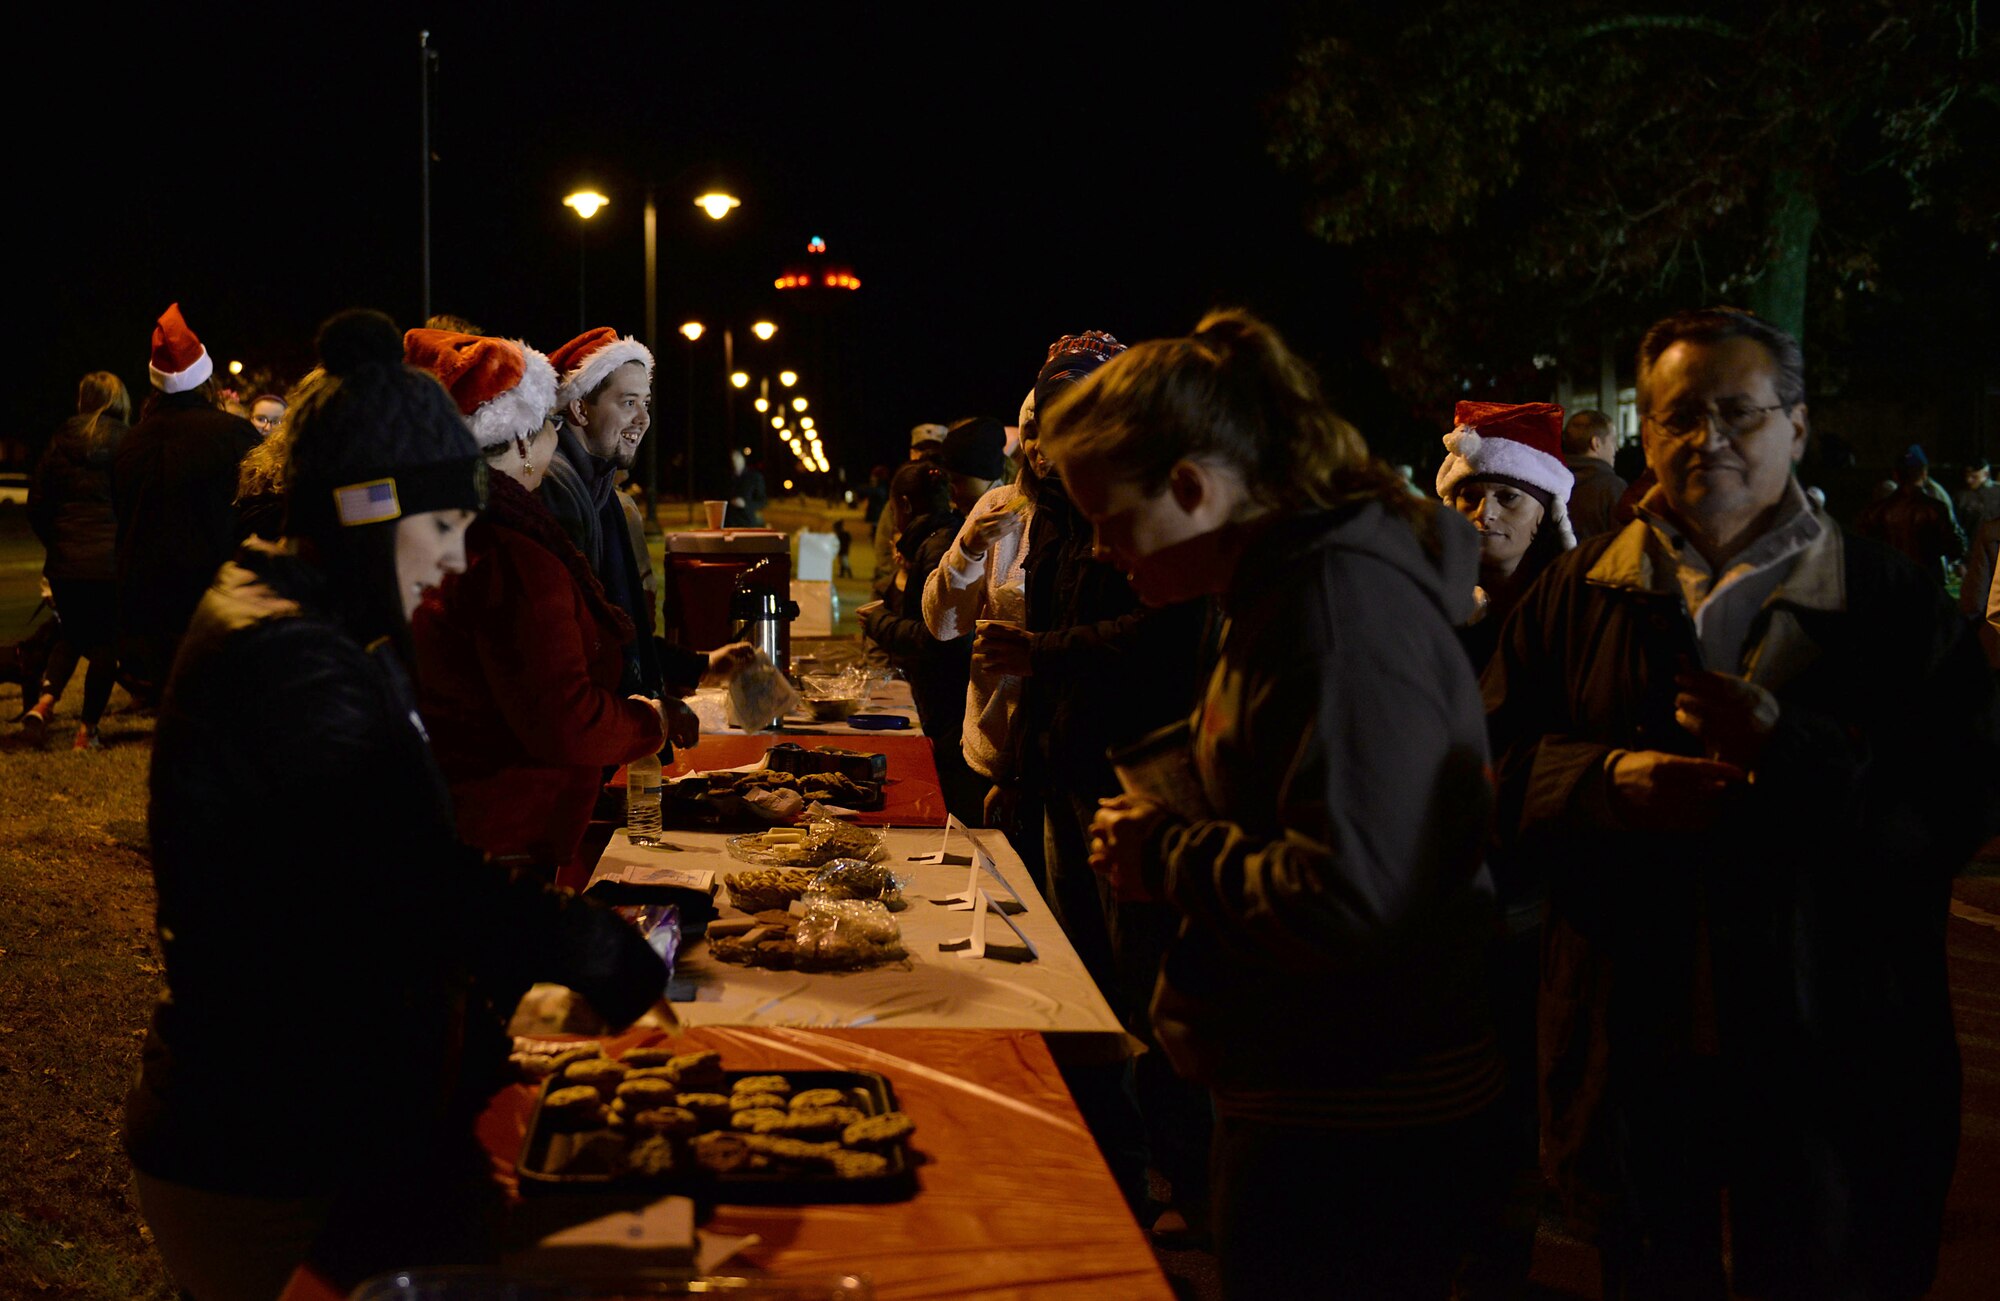 Team BLAZE members serve cookies to attendees during the Base Christmas Tree Lighting Dec. 4, 2018, at the BLAZE Chapel on Columbus Air Force Base, Mississippi. Cookies and drinks were provided by various base organizations, and the Caledonia High School Choir performed Christmas carols during the event. (U.S. Air Force photo by Airman Hannah Bean)